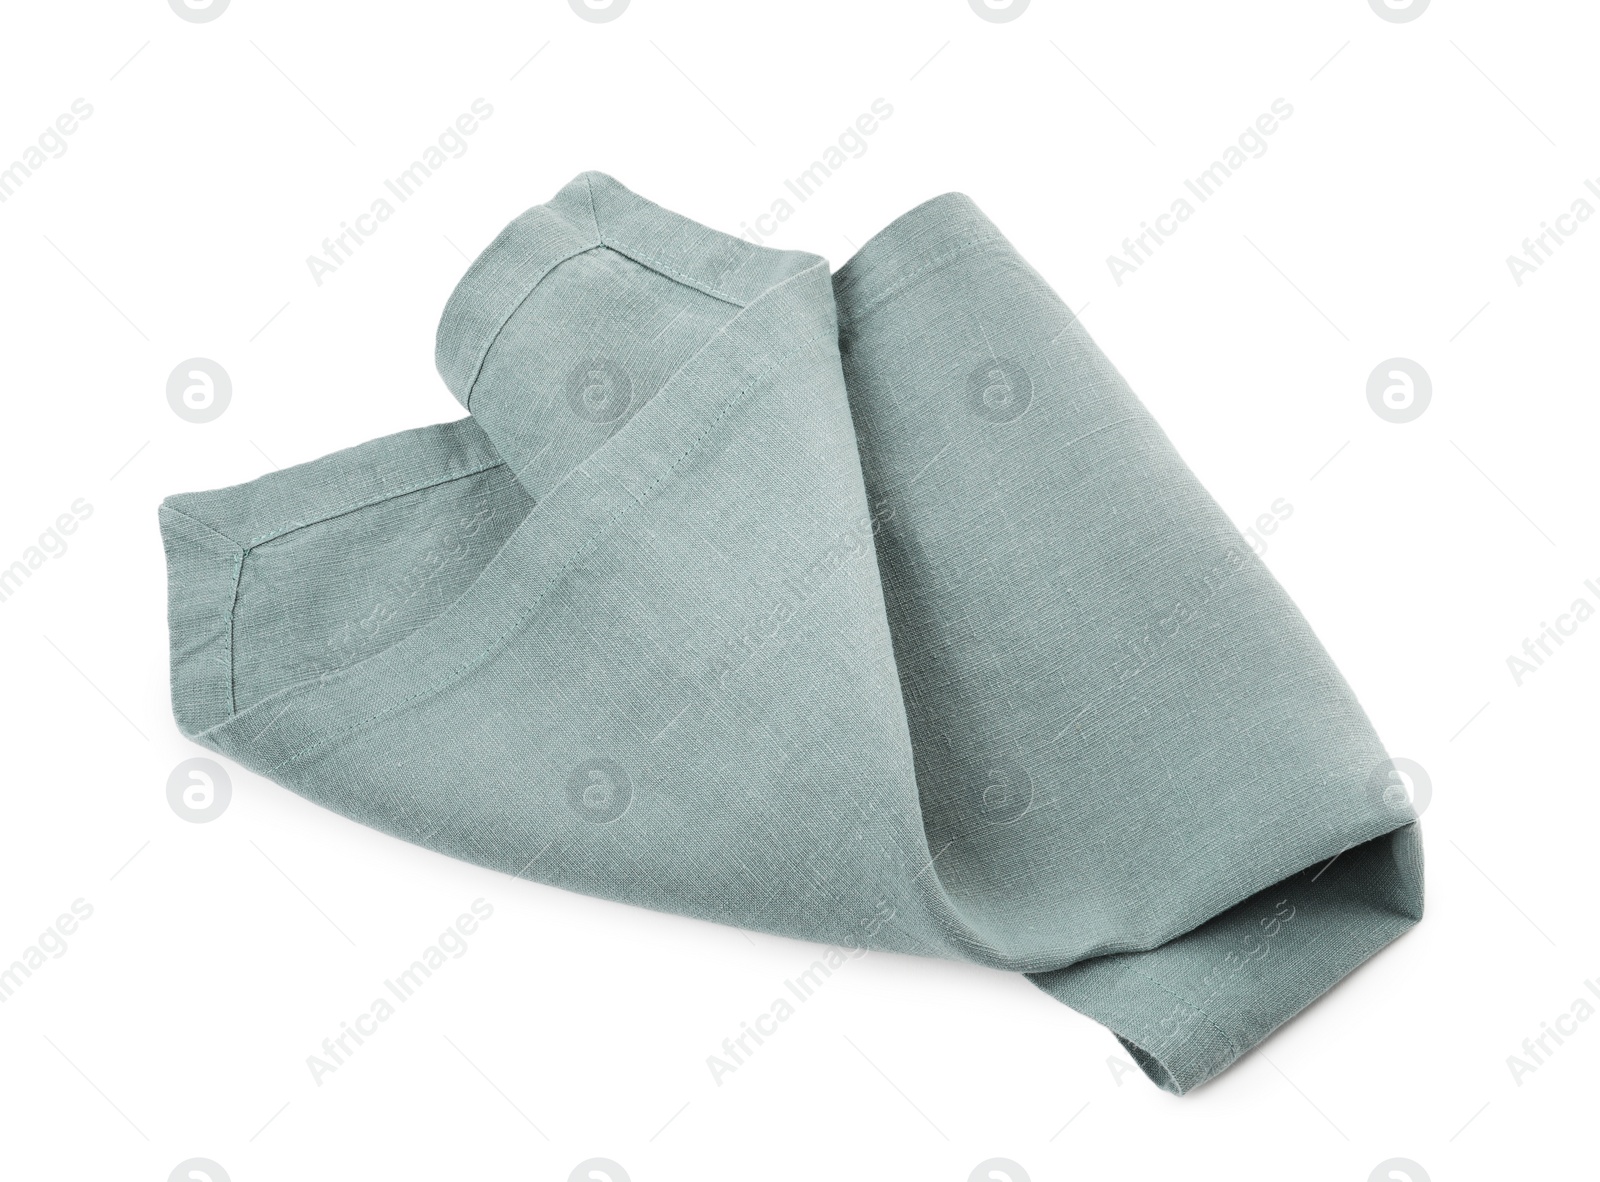 Photo of Fabric napkin for table setting on white background